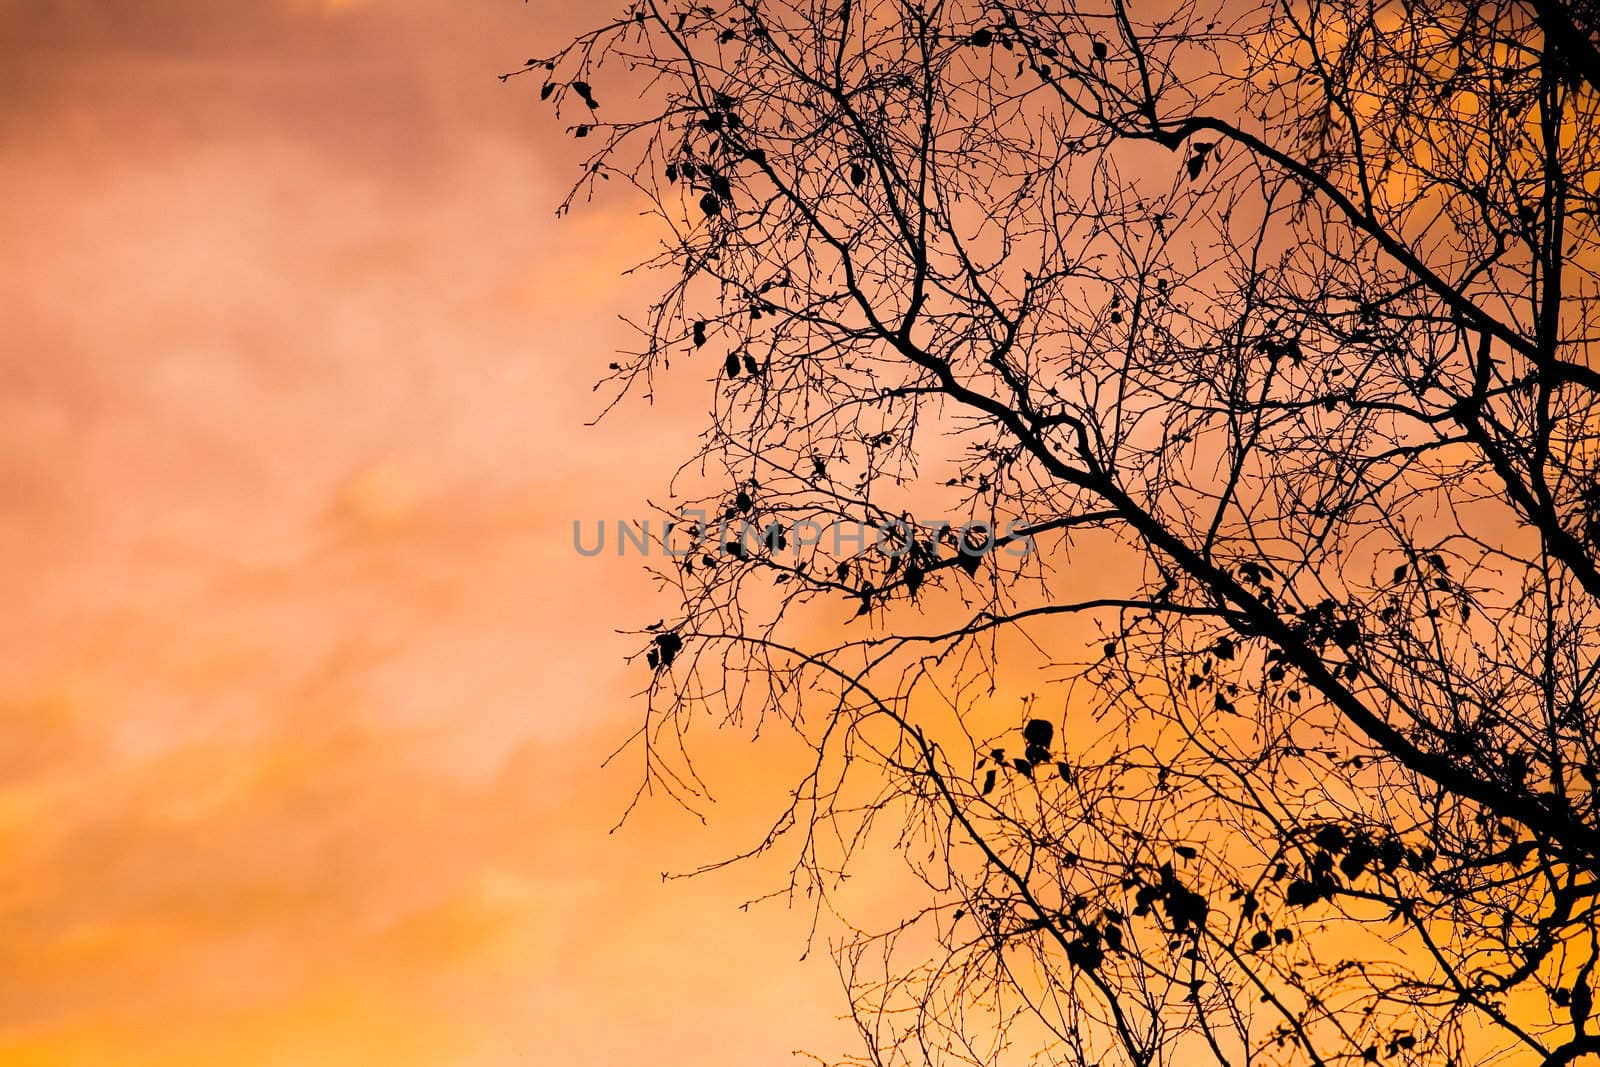 Silhouette of a suburban tree at sunset